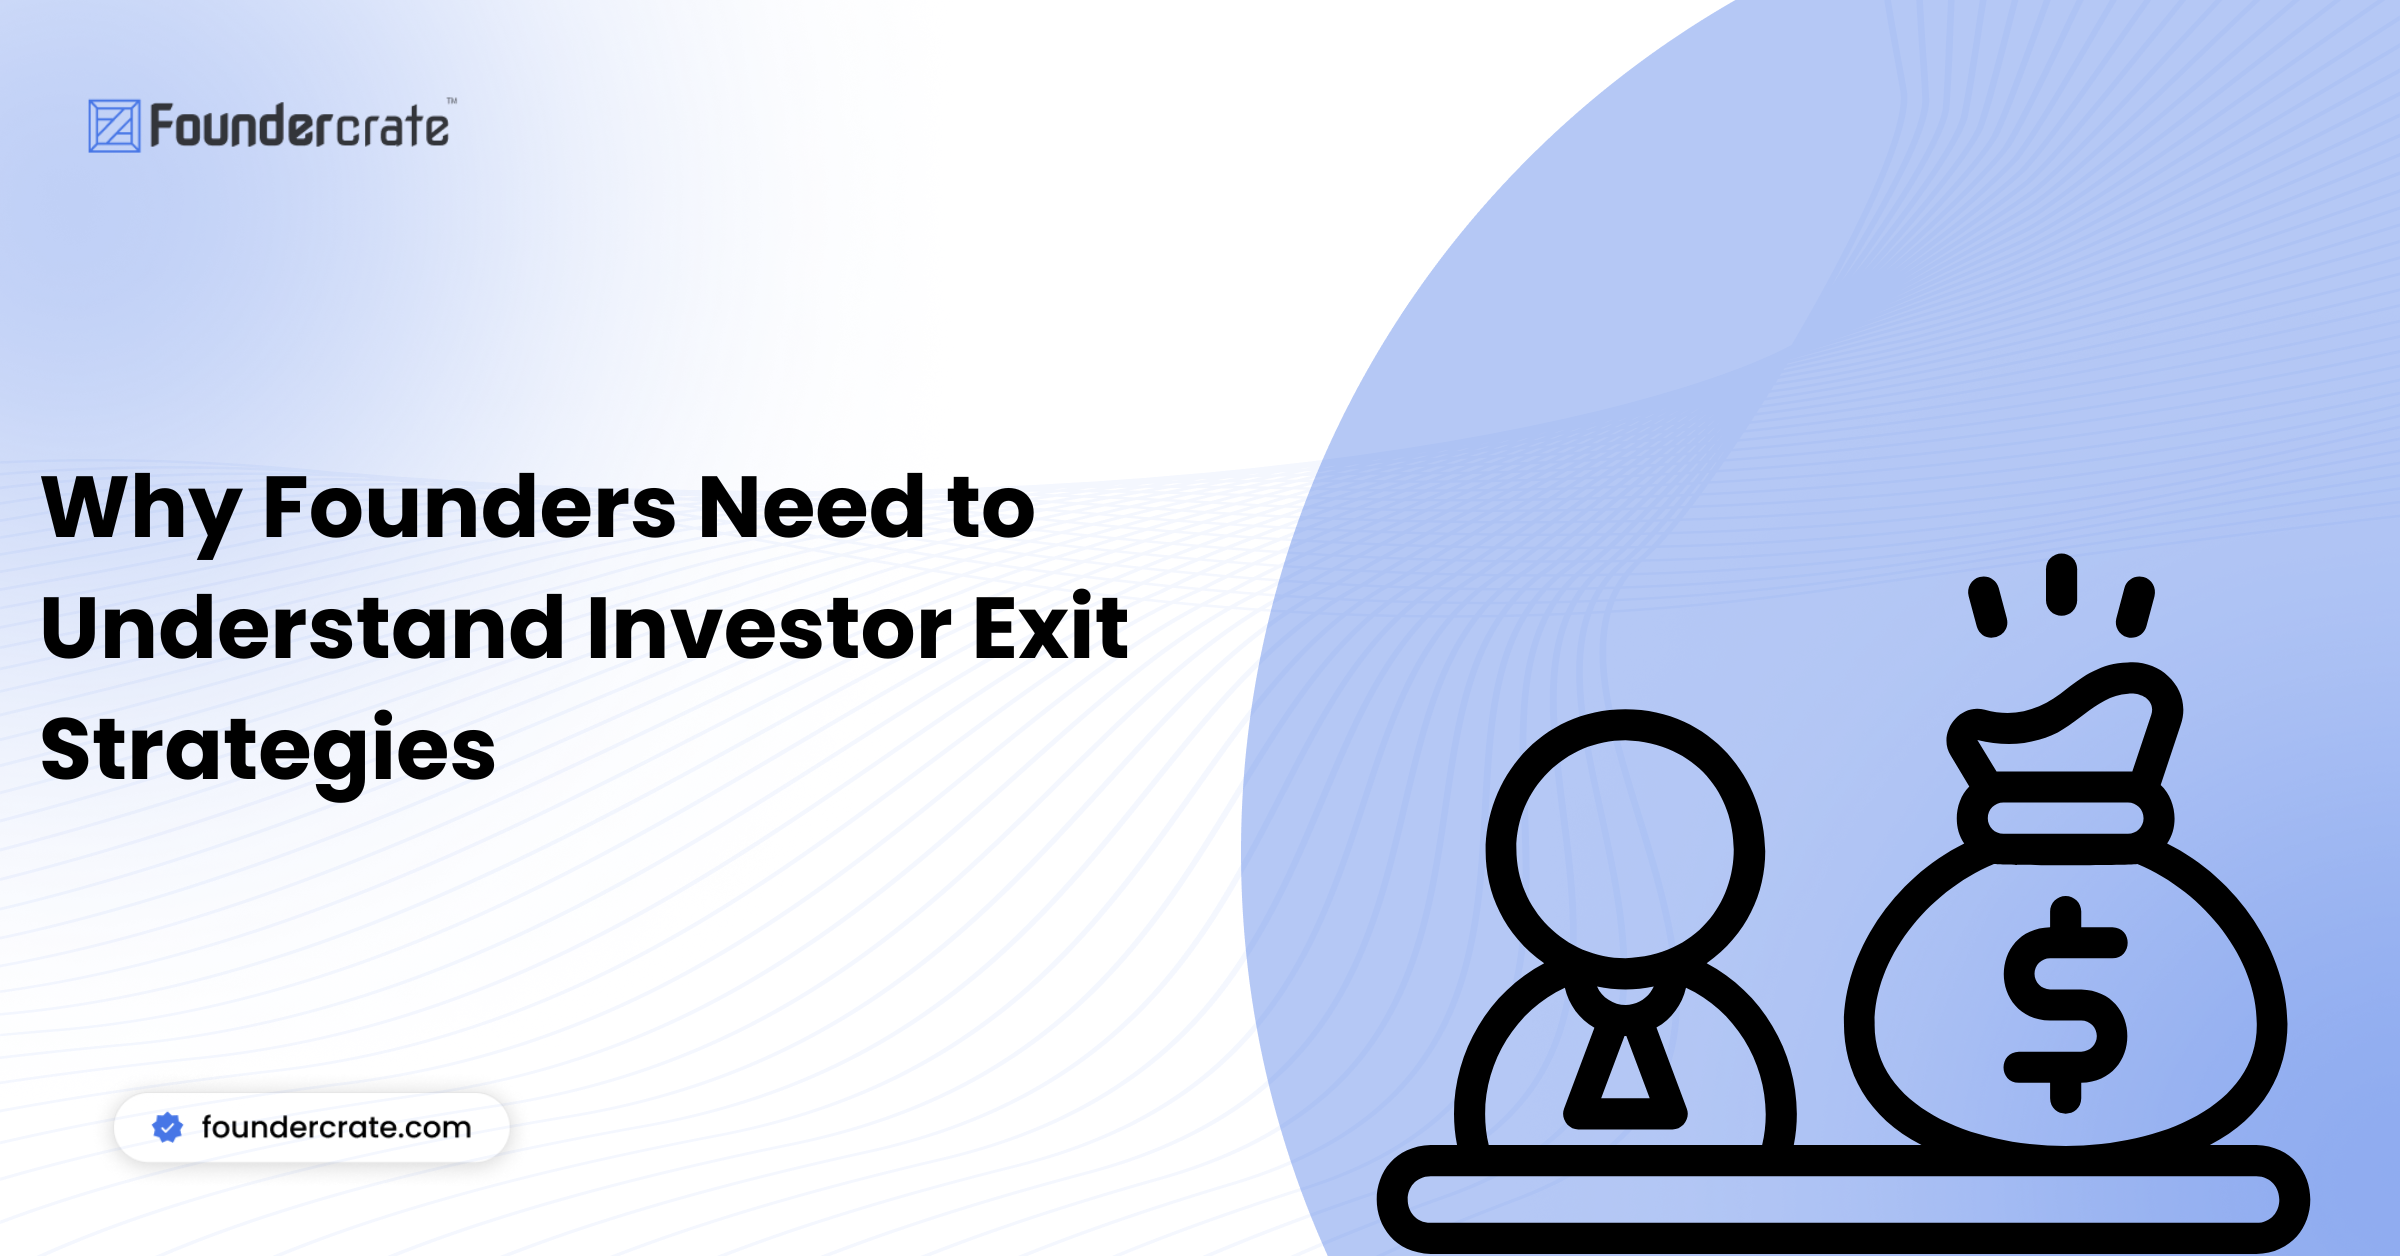 Why Founders Need to Understand Investor Exit Strategies